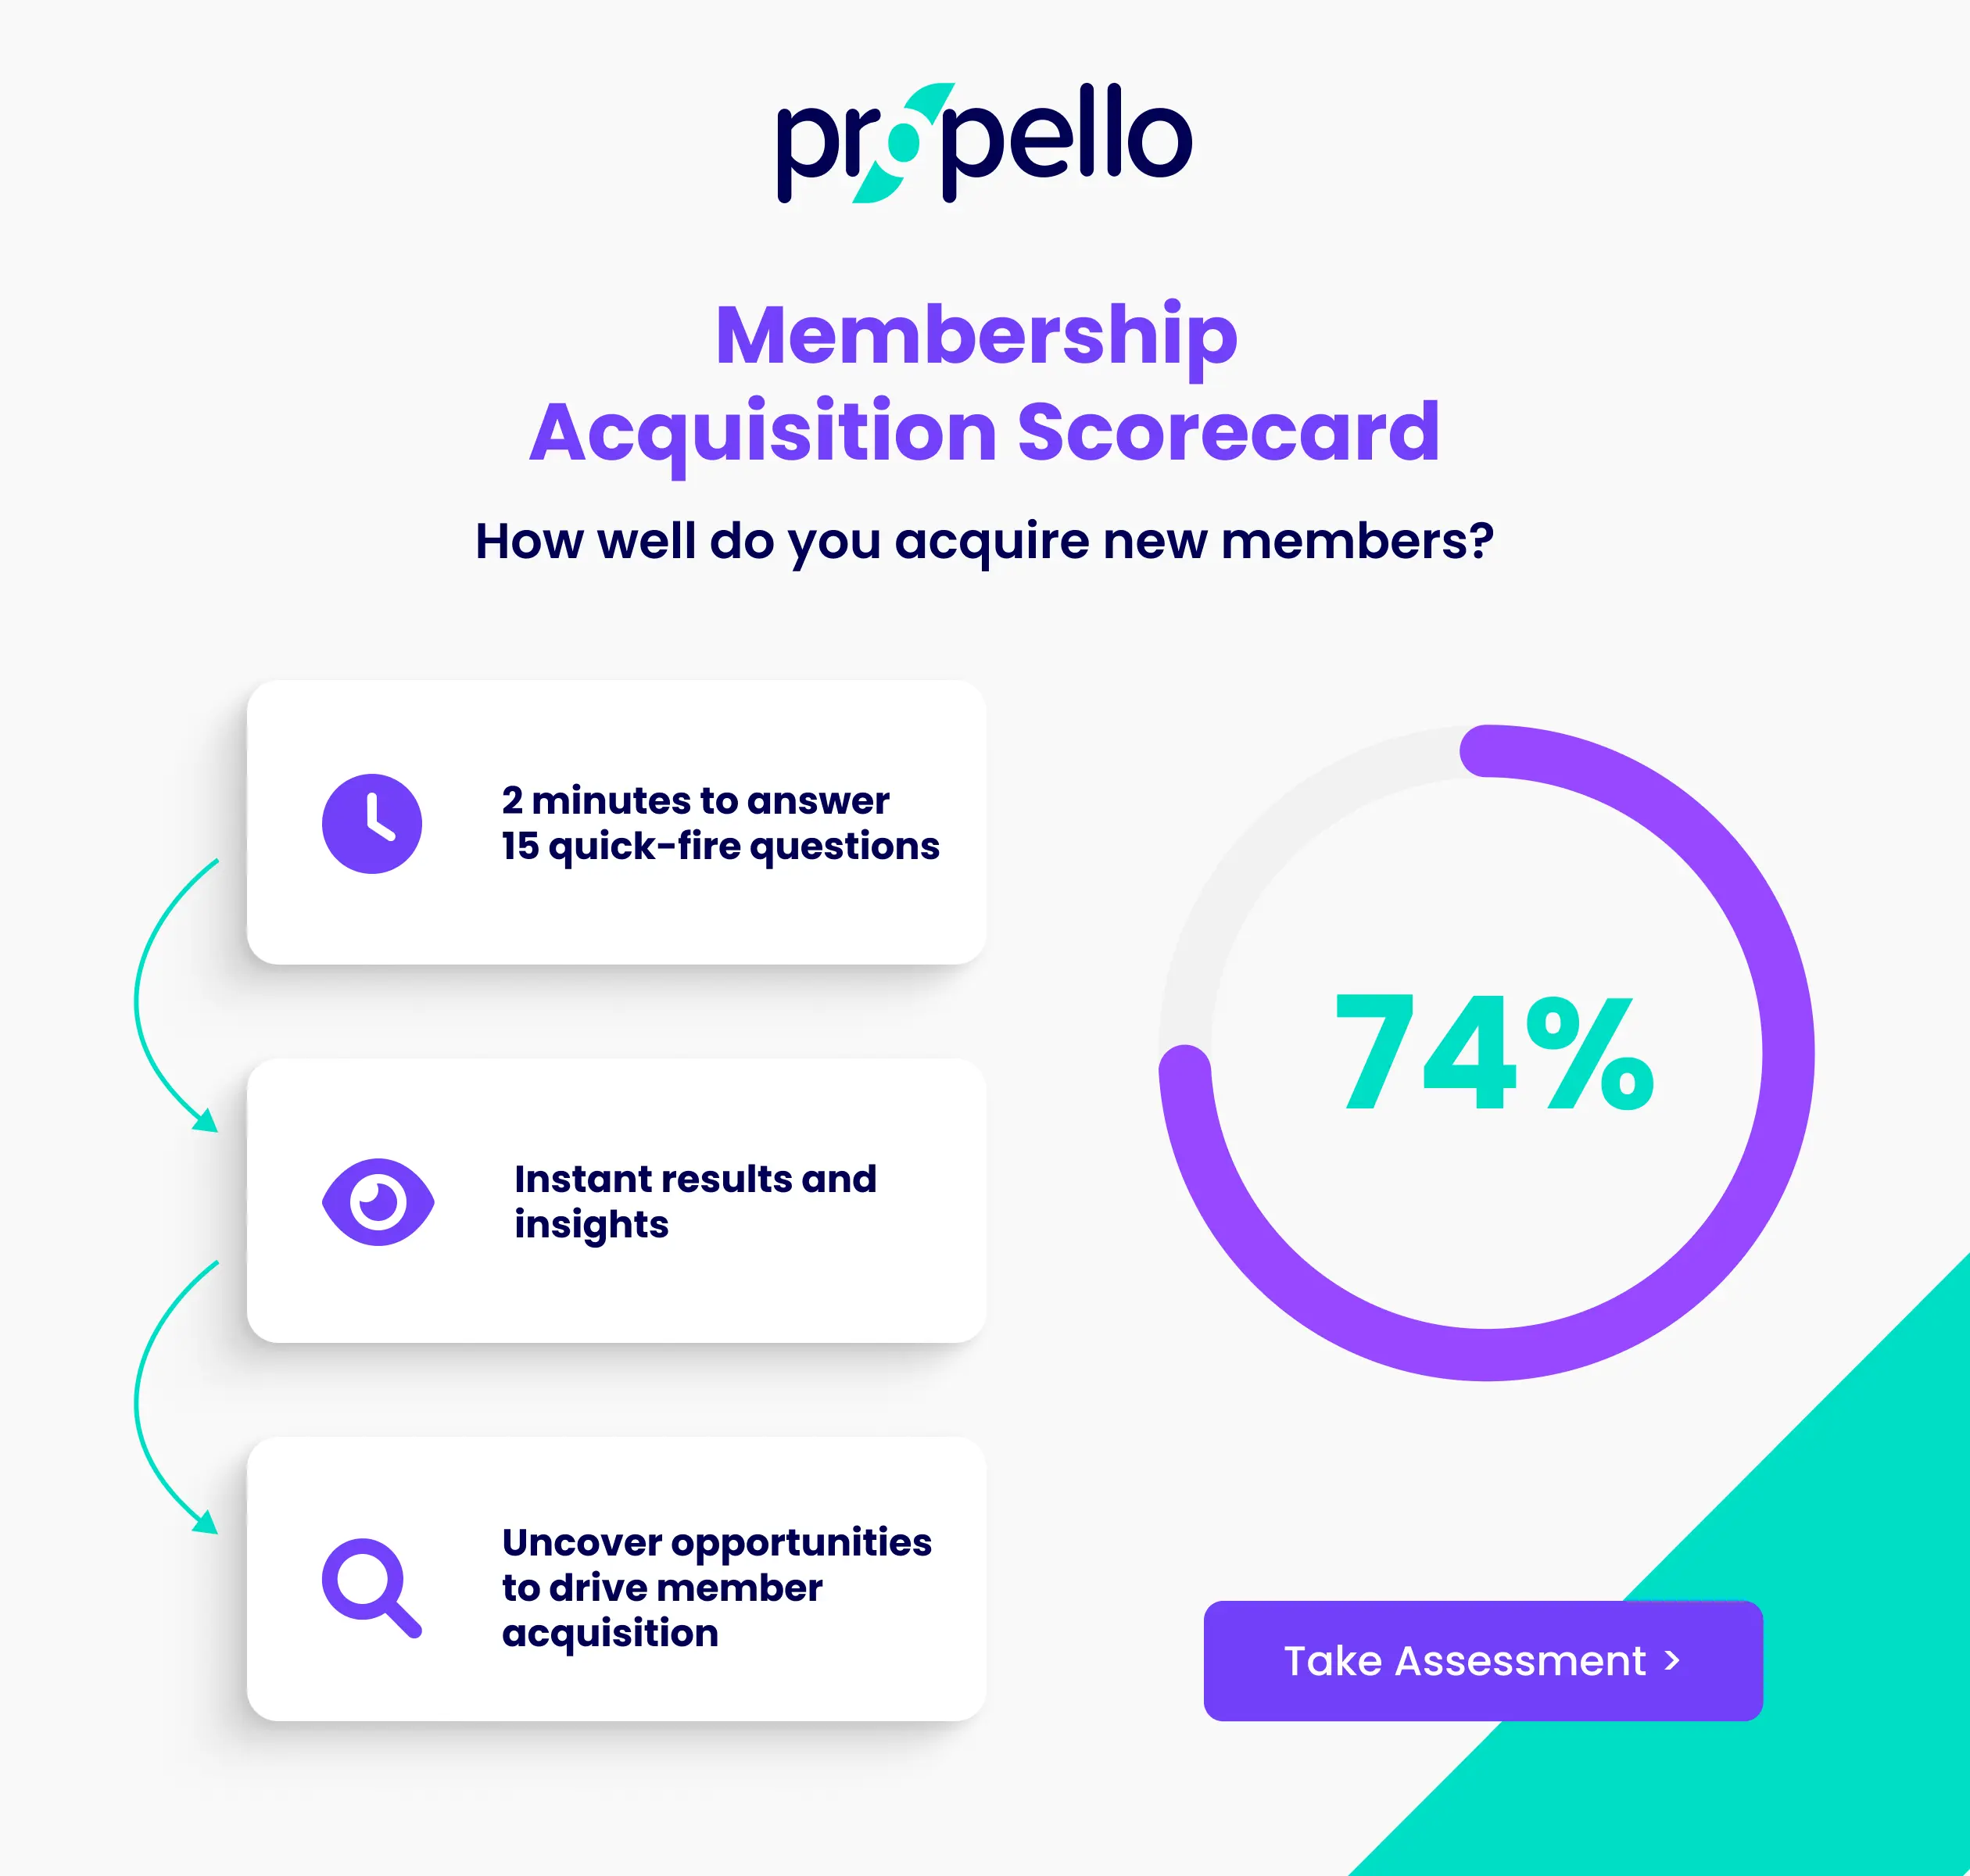 Membership Acquisition Scorecard: How well do you acquire new members?